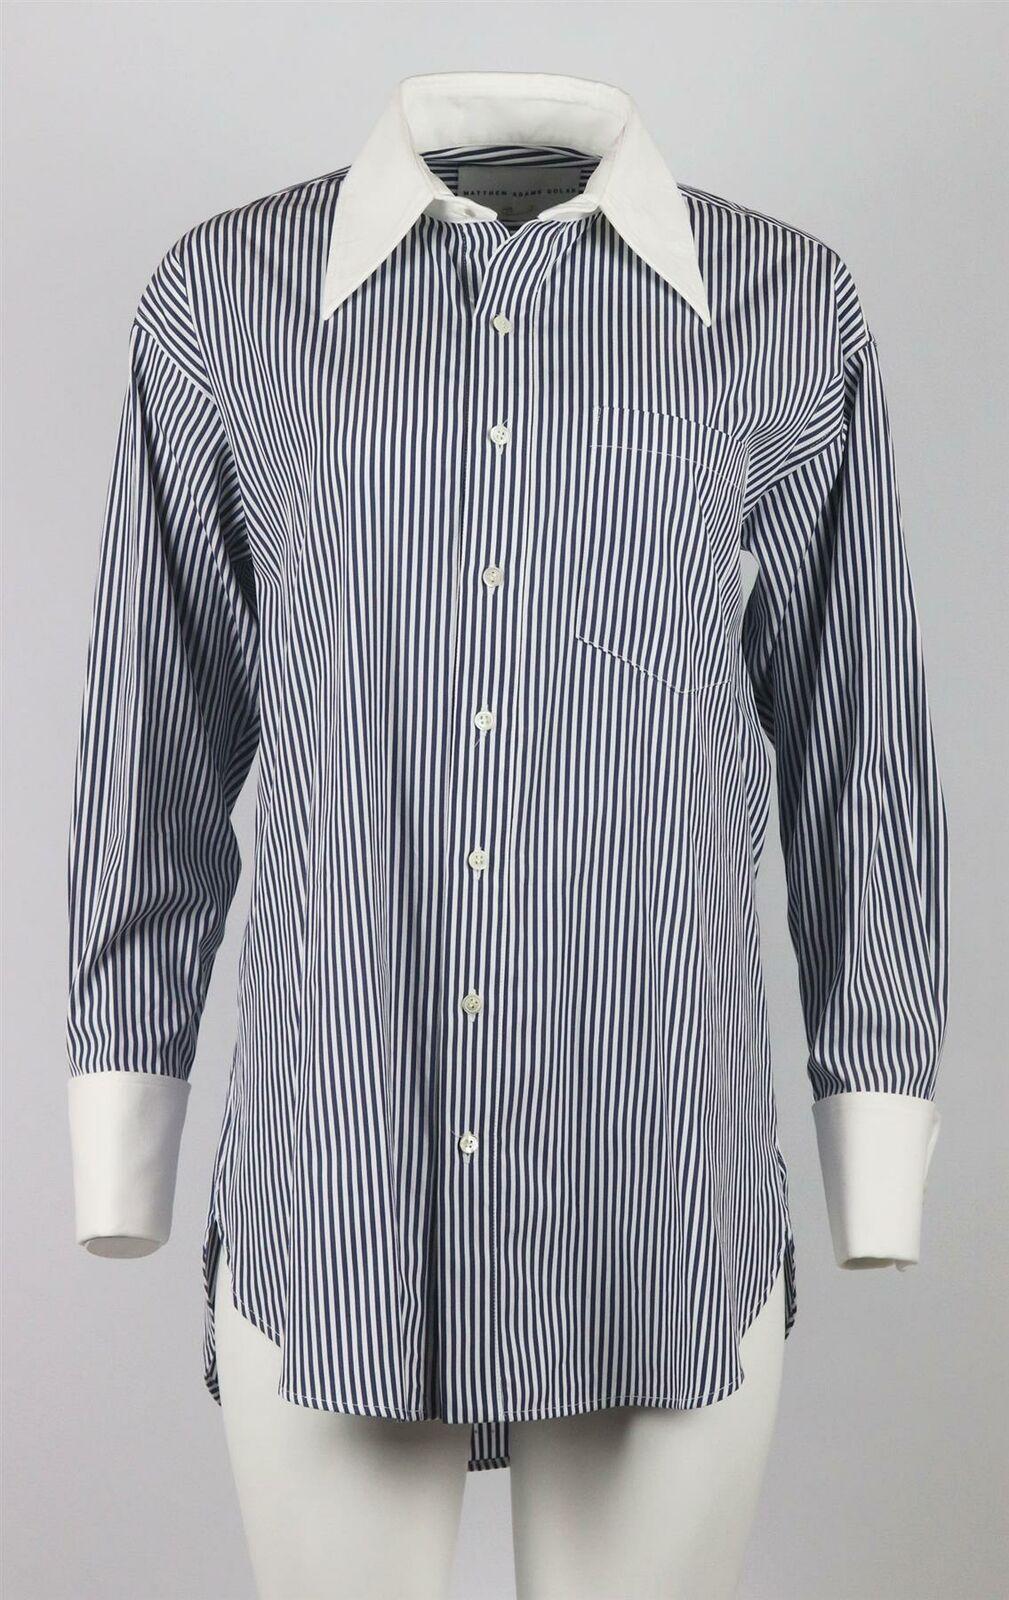 This navy and white Matthew Adams Dolan oversized shirt features a bold embroidered detail in the designers initials at the back, its cut from blue and white striped cotton poplin with bold white collar and cuffs.
Button fastening at front.
100%